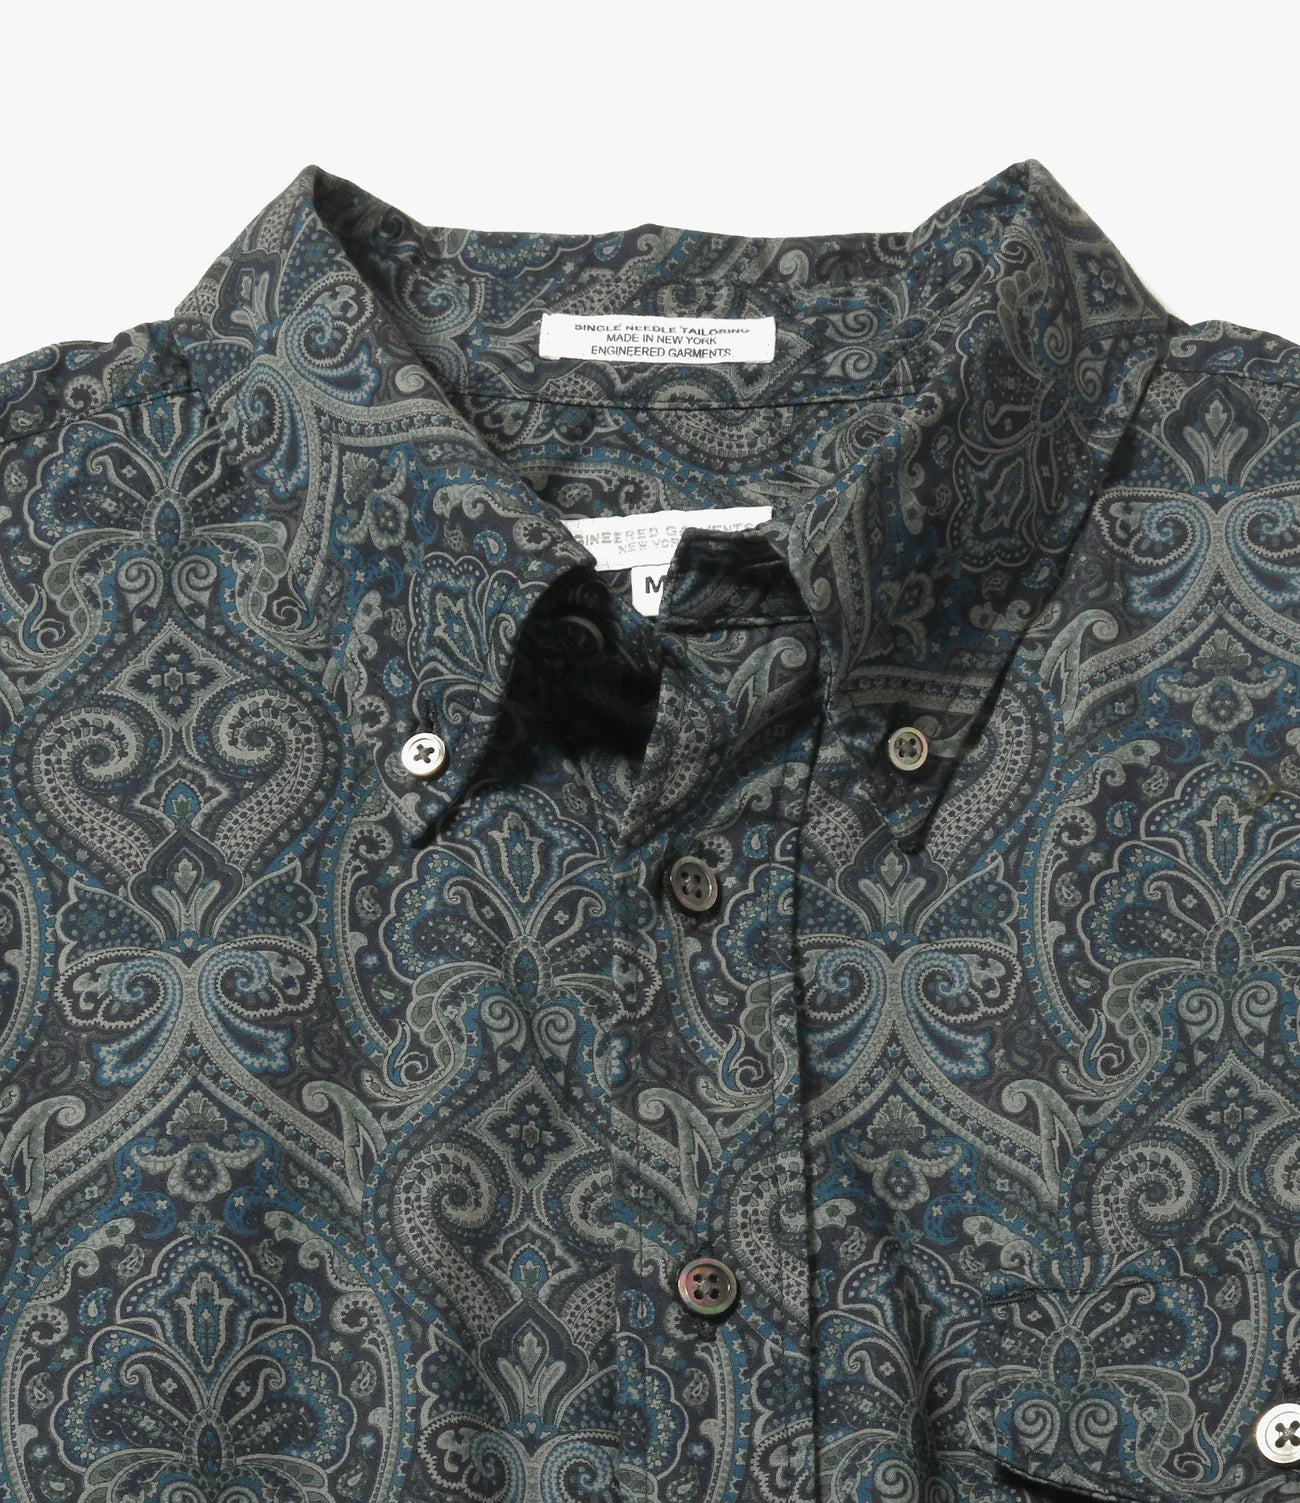 Engineered Garments Nepenthes SP Ivy BD Shirt - Navy Cotton Paisley Print